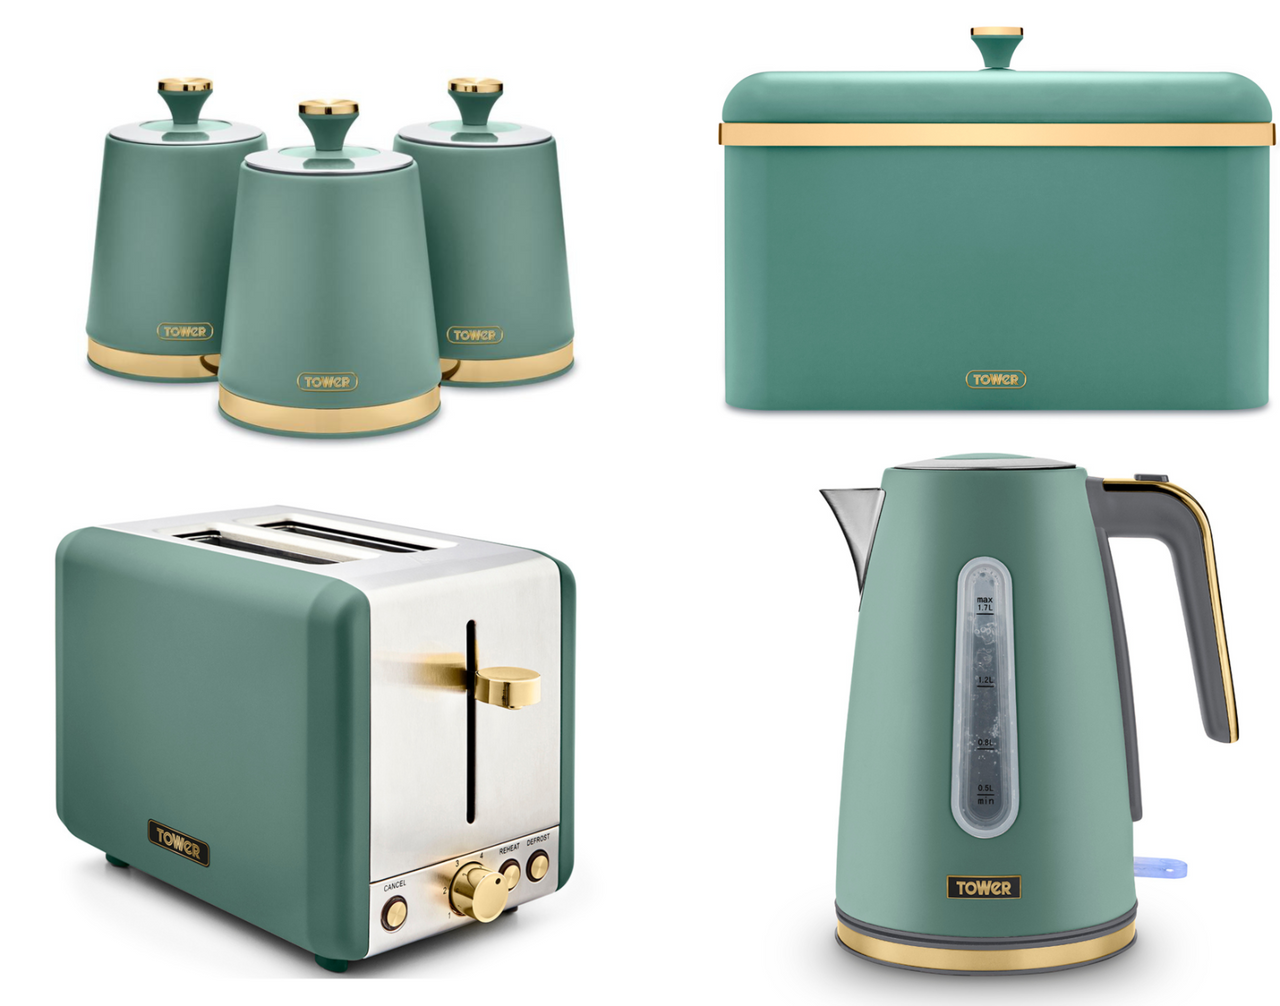 Tower Cavaletto Jade Jug Kettle, 2 Slice Toaster, Bread Bin & Canisters Matching Set of 6